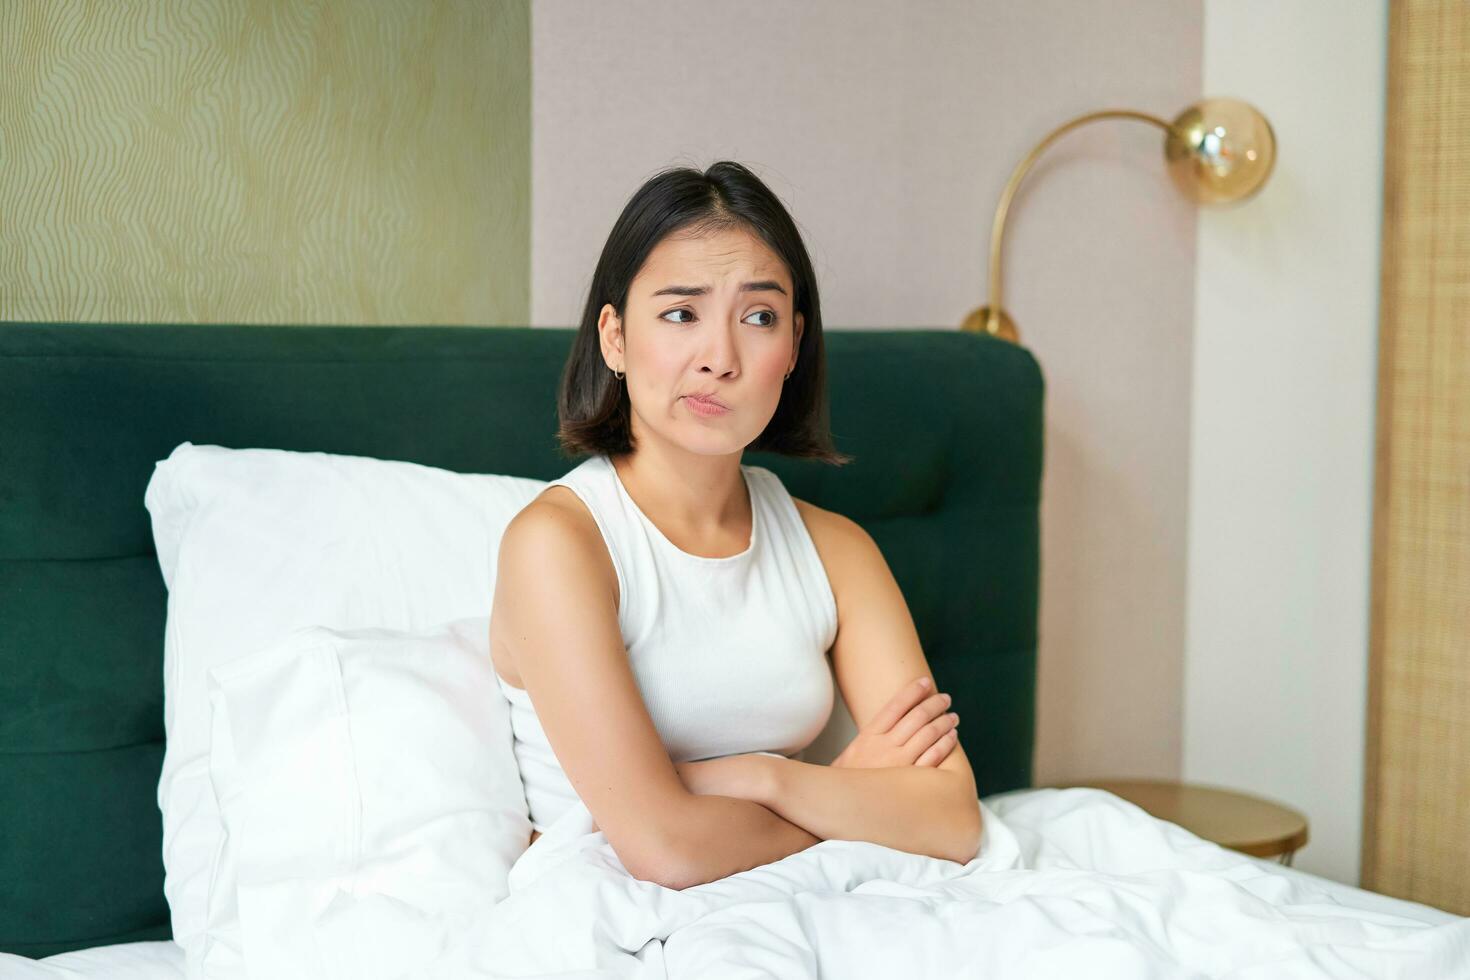 Portrait of asian girl in bed, looking complicated and worried, cross arms on chest, frowning with uneasy, thinking face expression photo